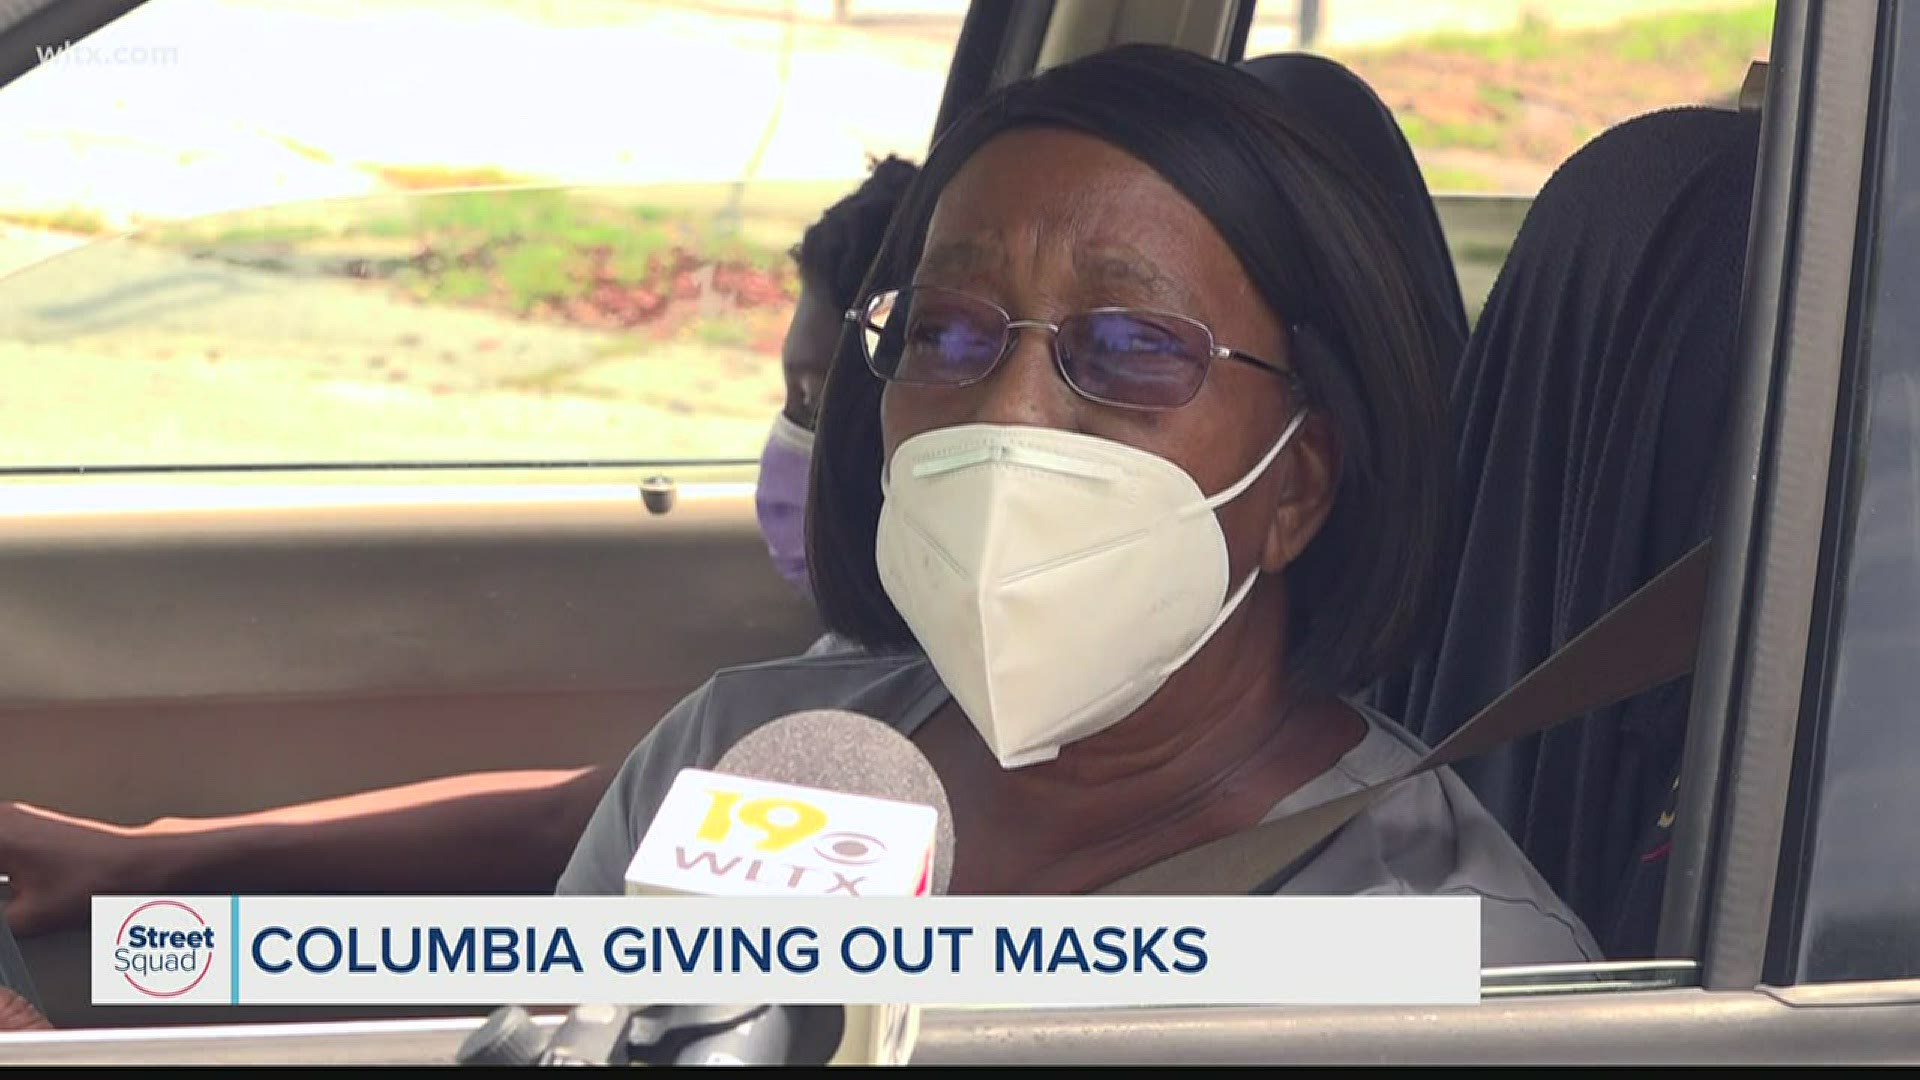 People who live in Columbia are now able to pickup free masks from the city.